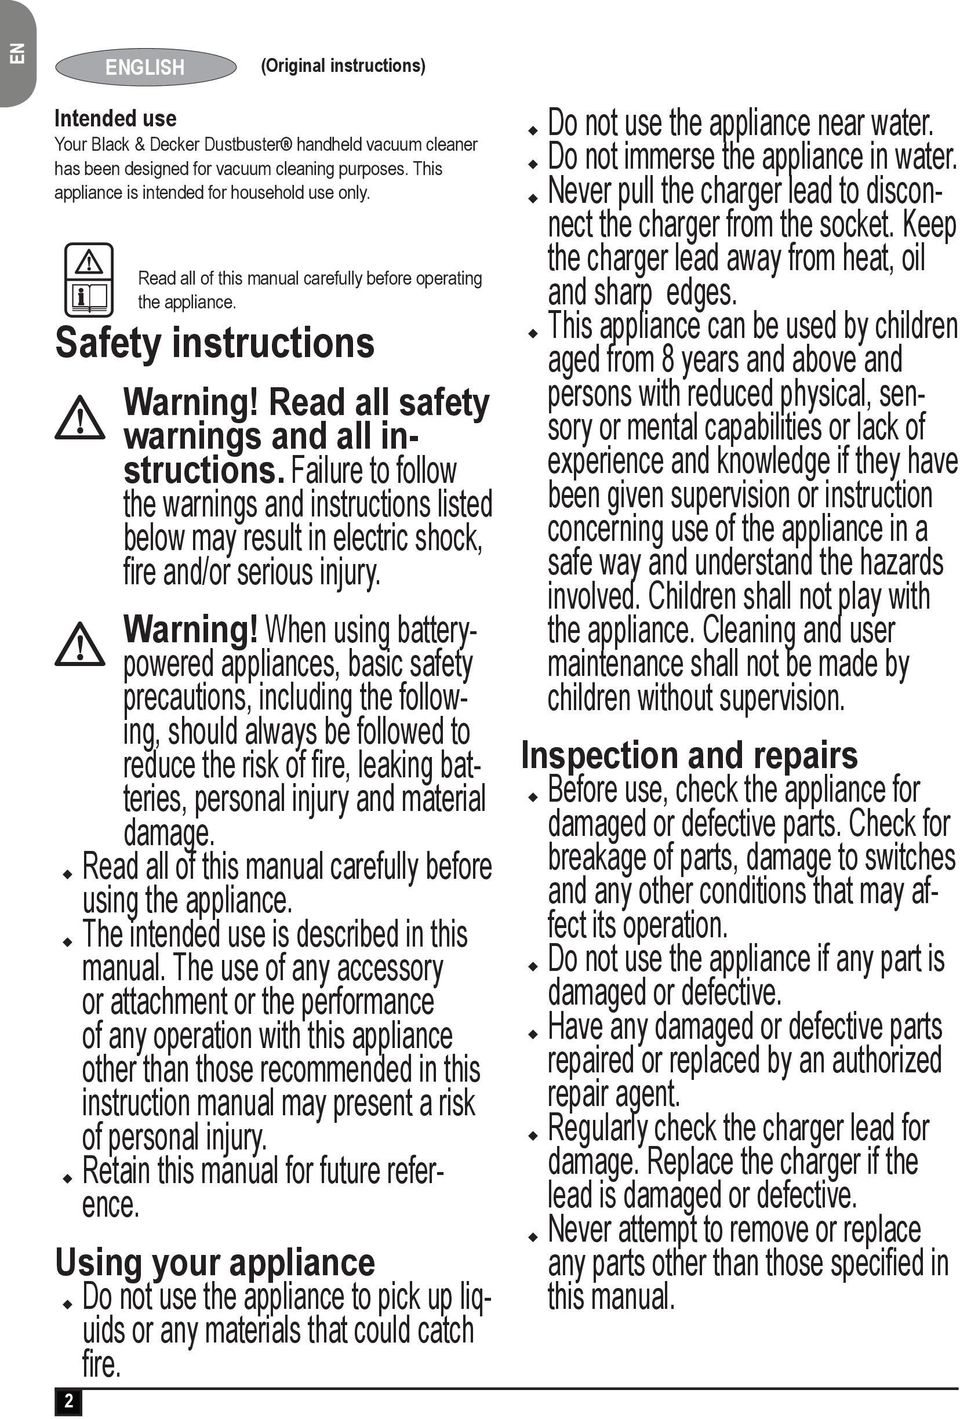 Failure to follow the warnings and instructions listed below may result in electric shock, fire and/or serious injury. Warning!